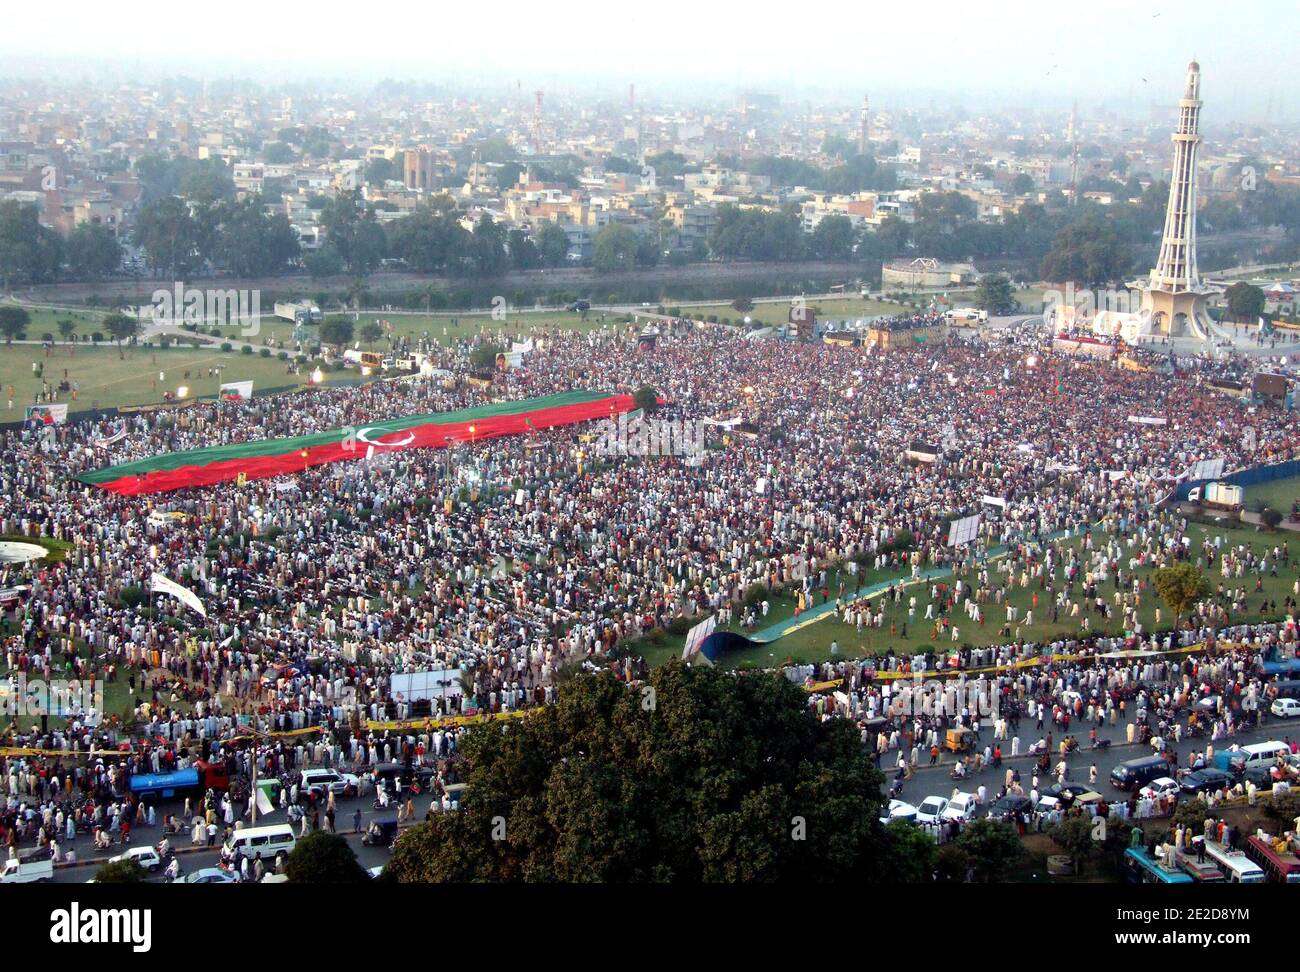 Supporters of Pakistani politician and former cricketer Imran Khan gathered for a rally in Lahore, Pakistan on October 30, 2011. A crowd of thousands gathered called by Khan to press President Asif Ali Zardari to step down. The rally, seen as a show of strength, comes two days after Sharif's brother Shahbaz, attracted some 30,000 people at an anti-Zardari protest also in the key political battleground of Lahore. Photo by Irfan/ABACAPRESS.COM Stock Photo